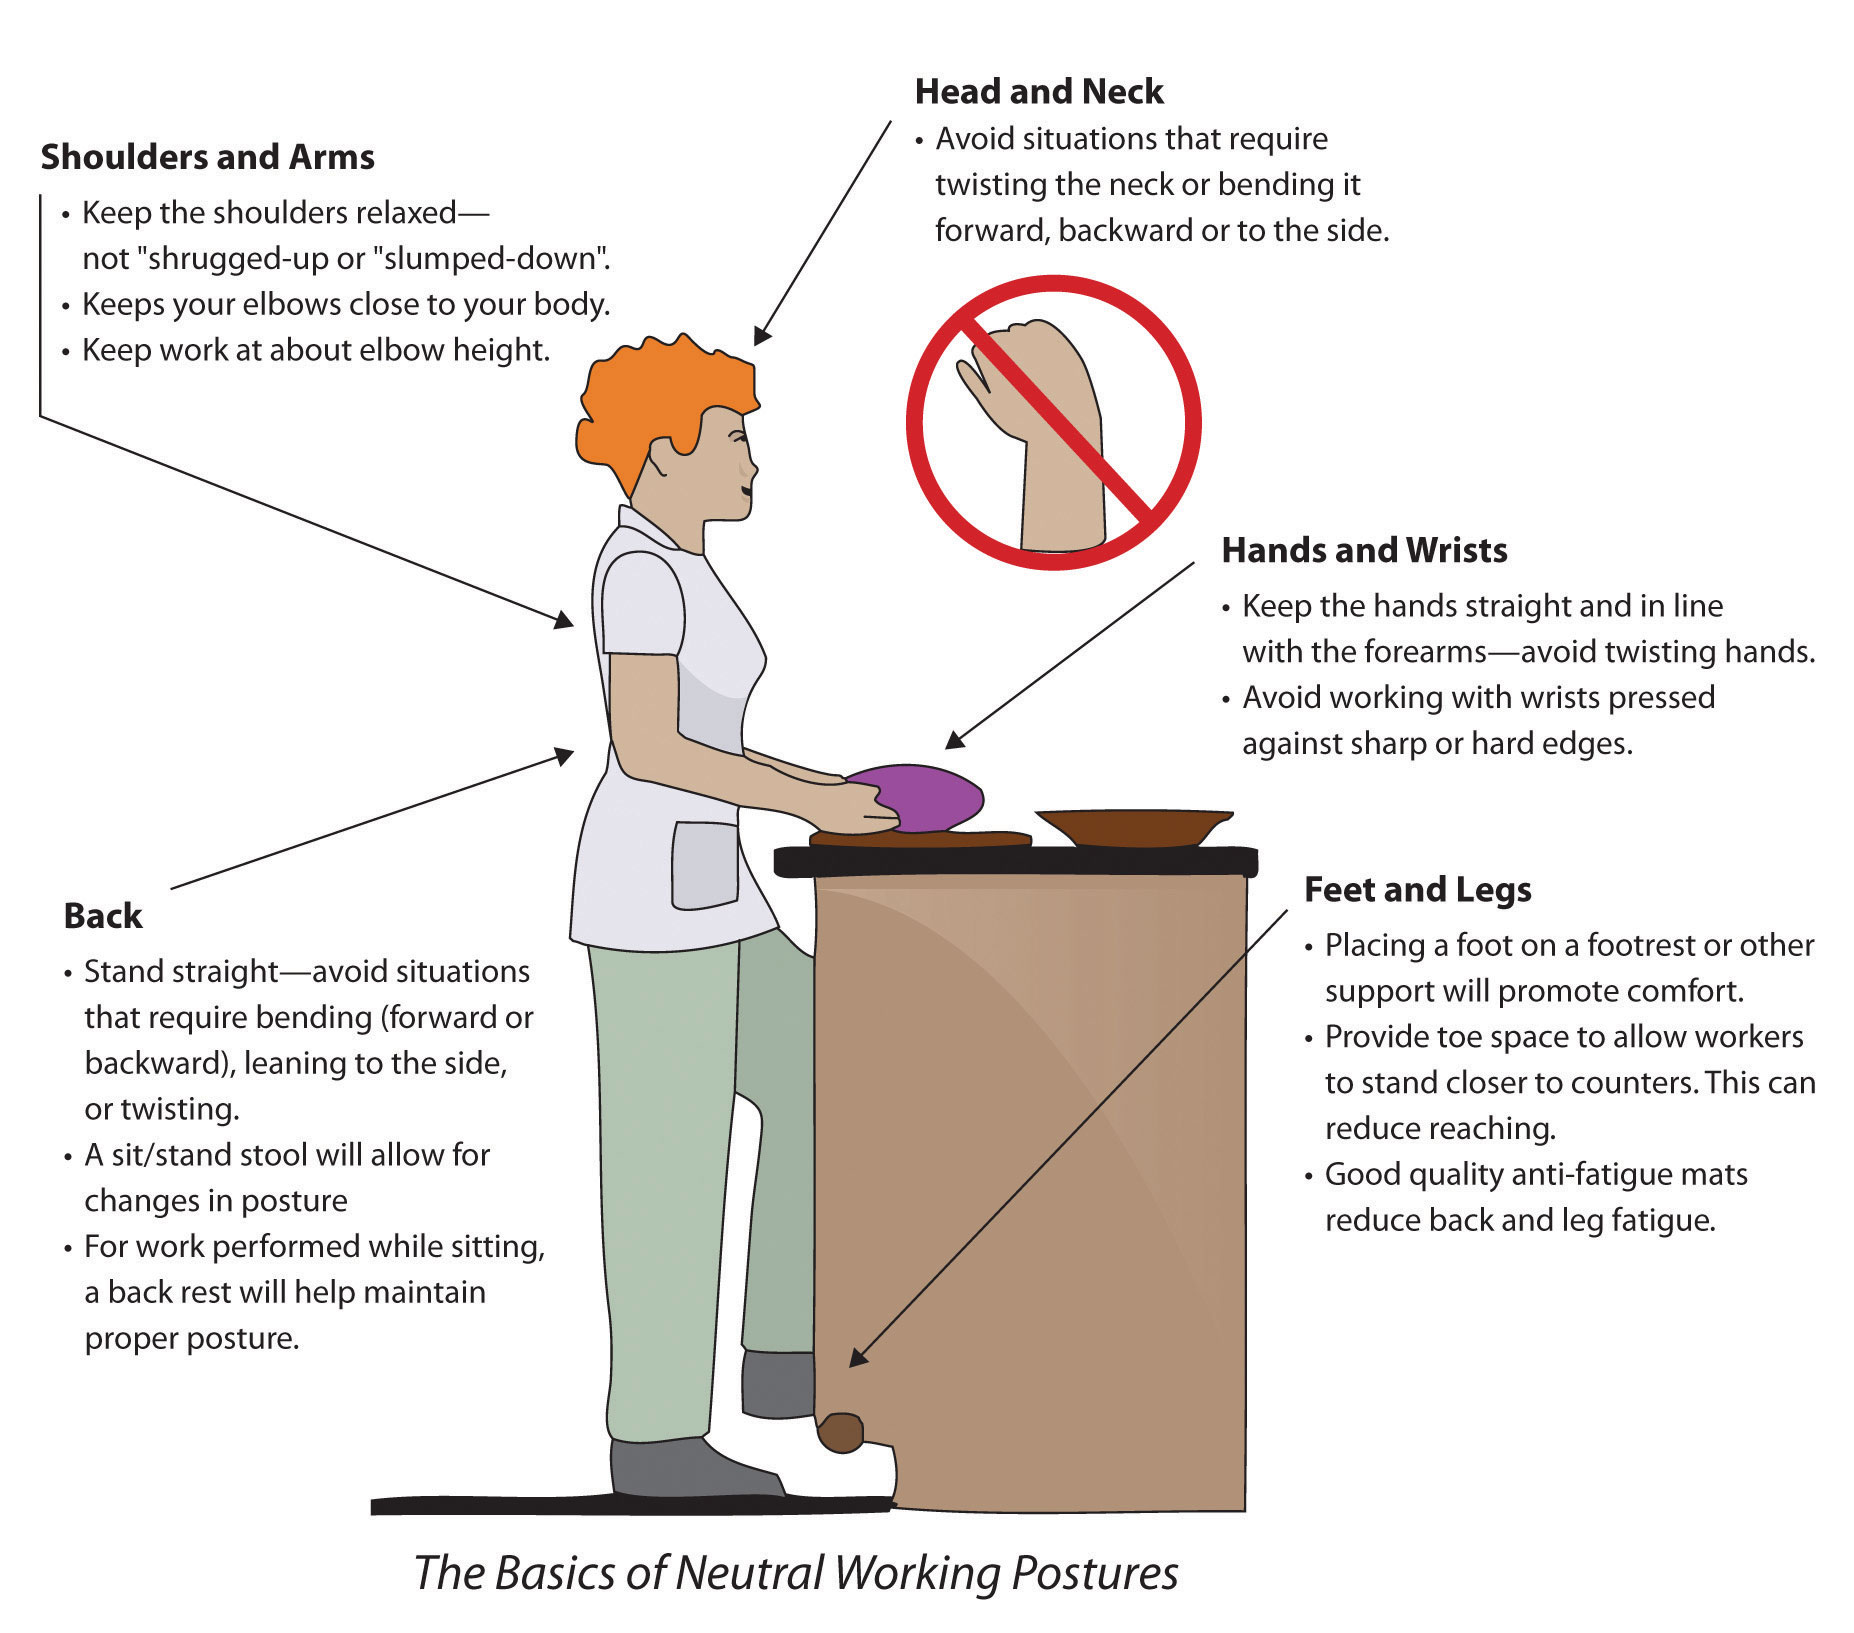 Learn OSHA's Ergonomic Guidelines to Create a Healthy Workplace